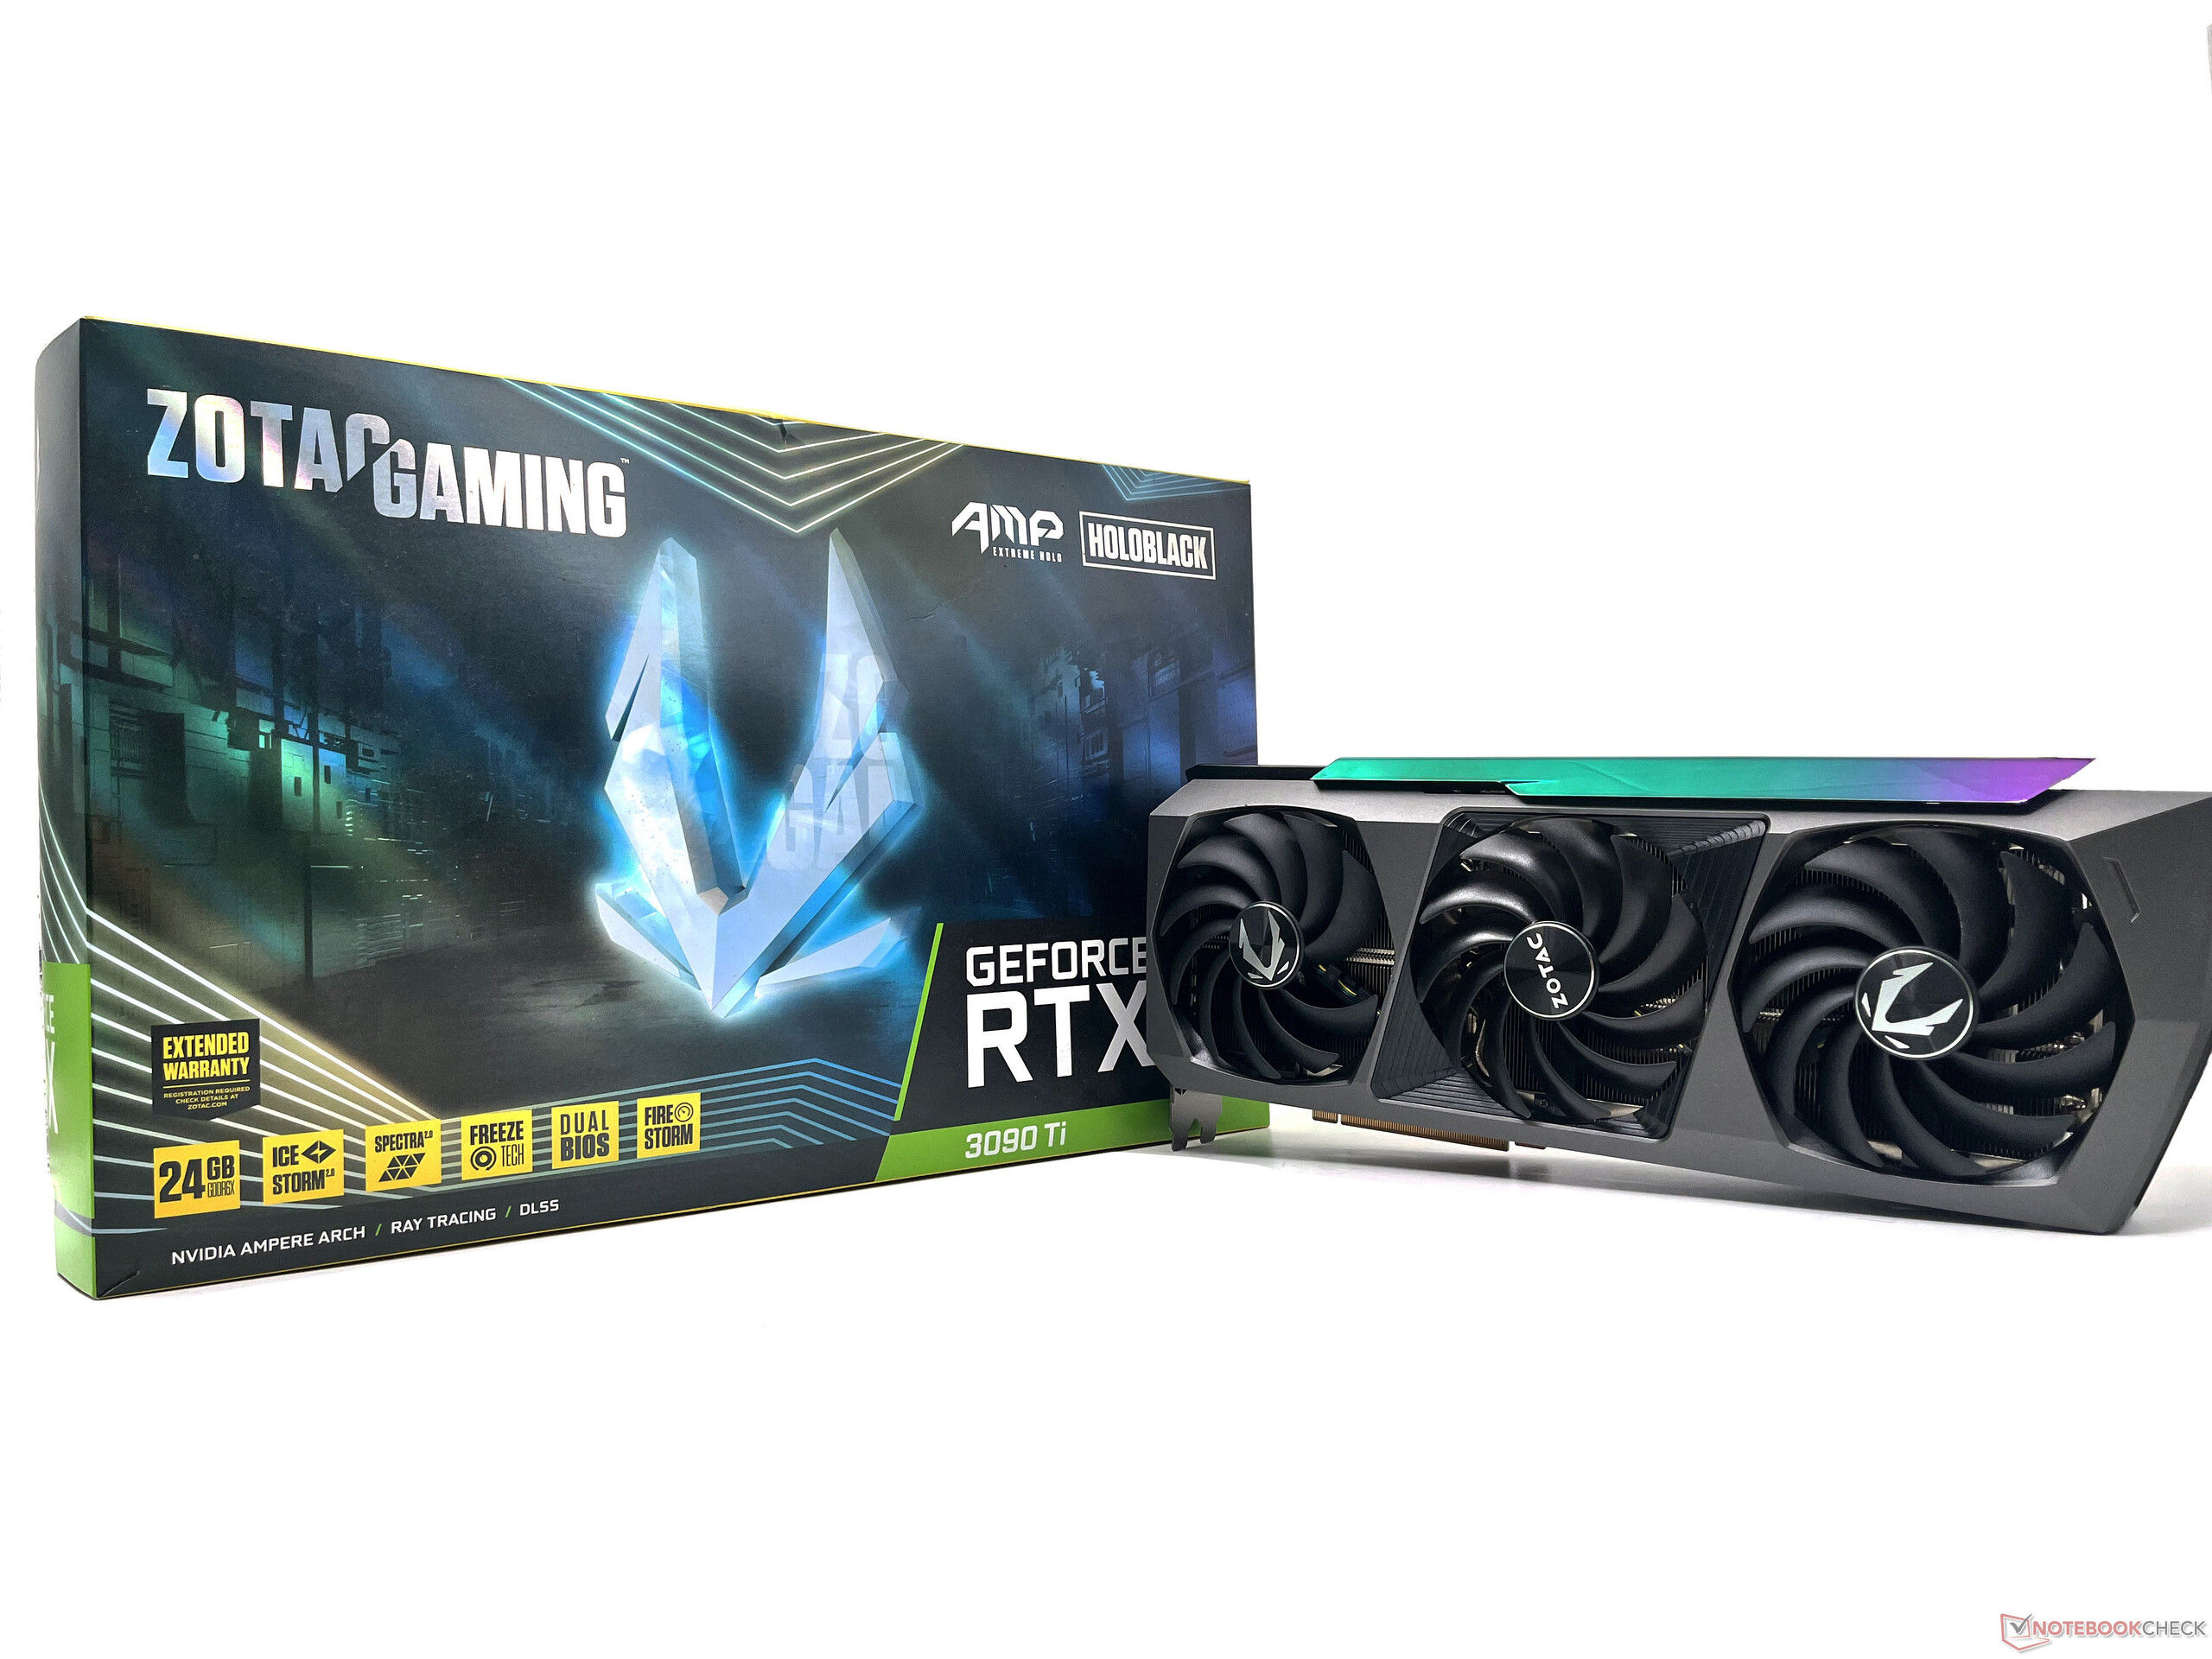 Zotac Gaming Geforce Rtx 3090 Ti Amp Extreme Holo Review 4k Gaming Monstrosity With A Price To Match Notebookcheck Net Reviews